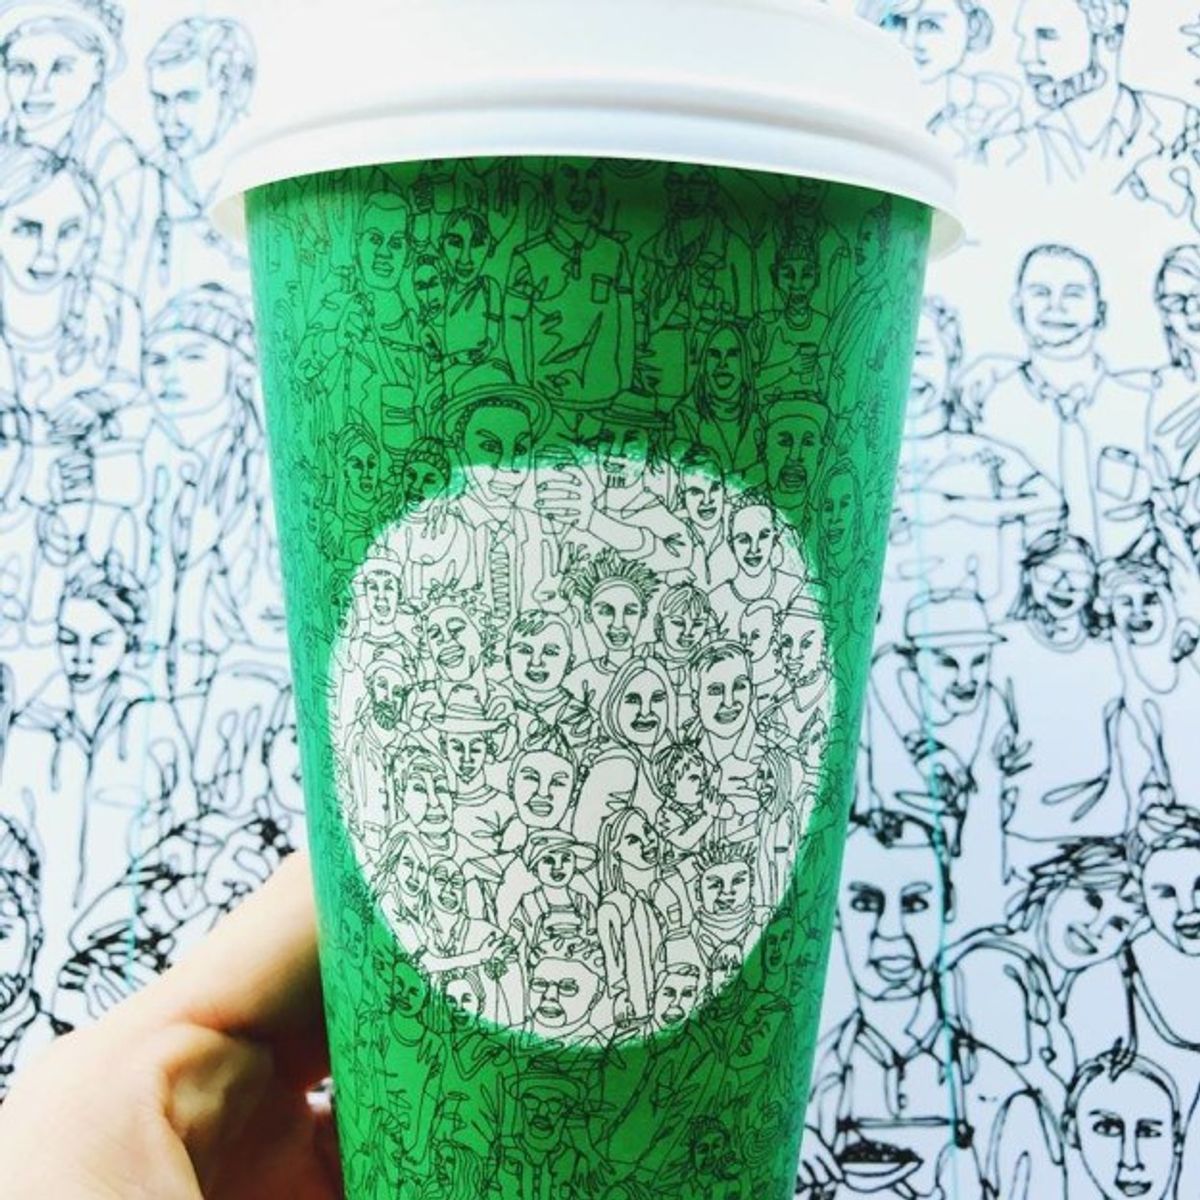 The Horror! Halloween Extended When Starbucks Rolls Out Green Cups Instead Of Red